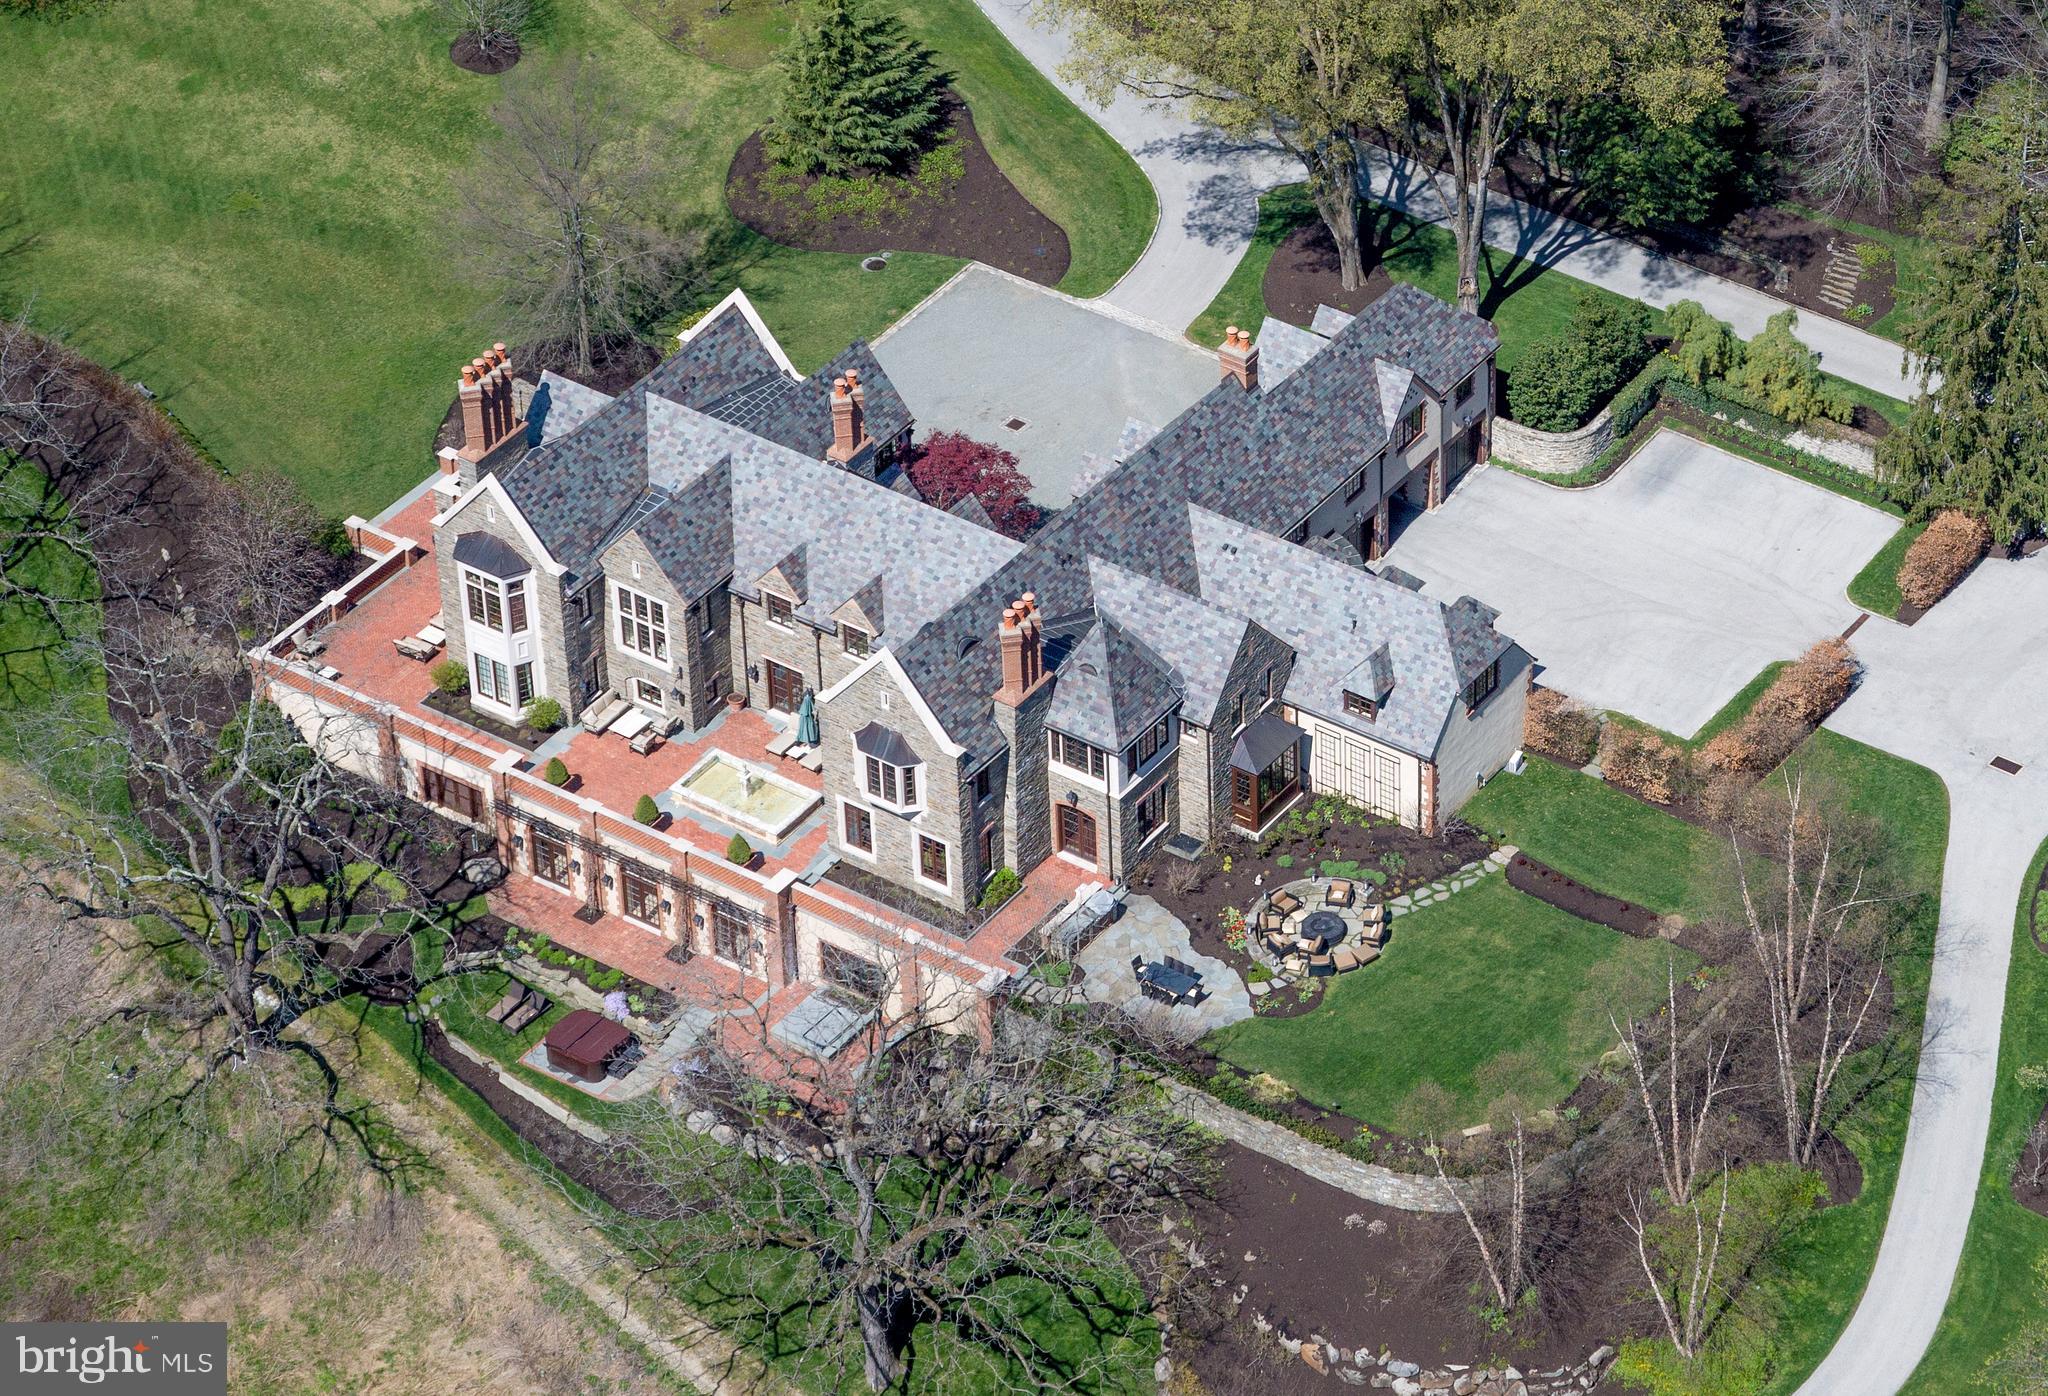 an aerial view of a house with a garden and trees